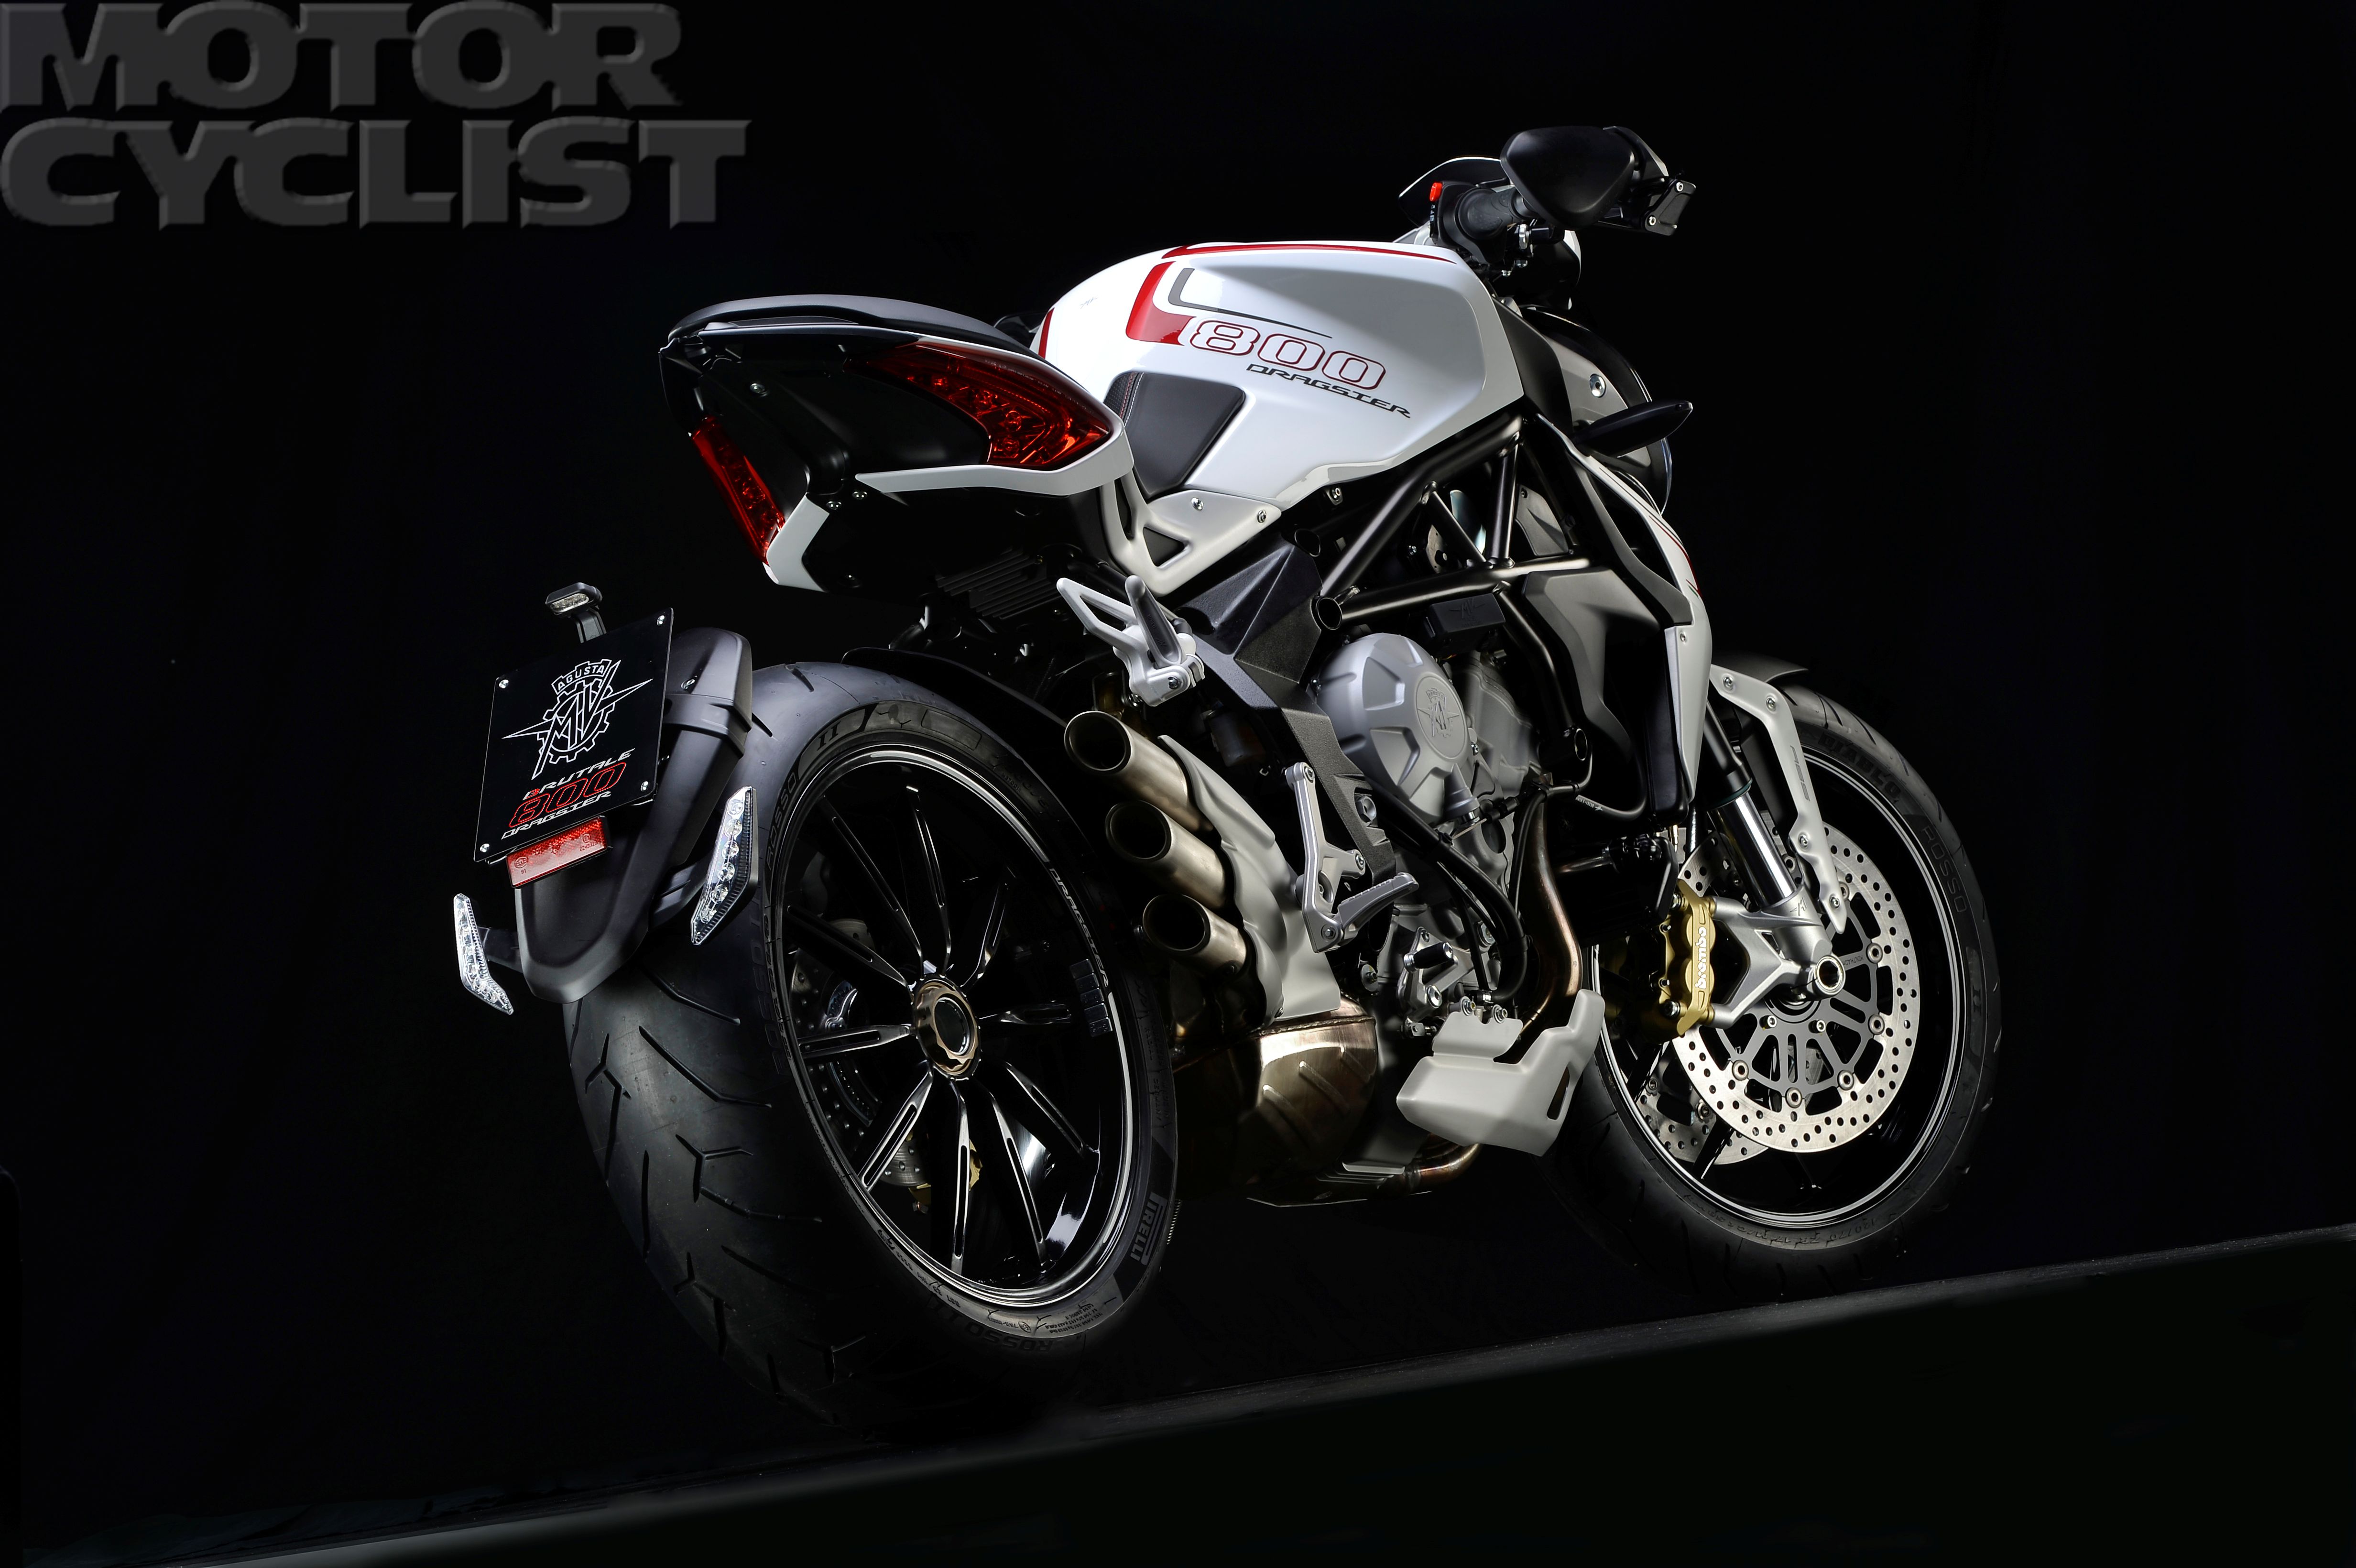 First Look: 2014 MV Agusta Brutale 800 Dragster | Motorcyclist